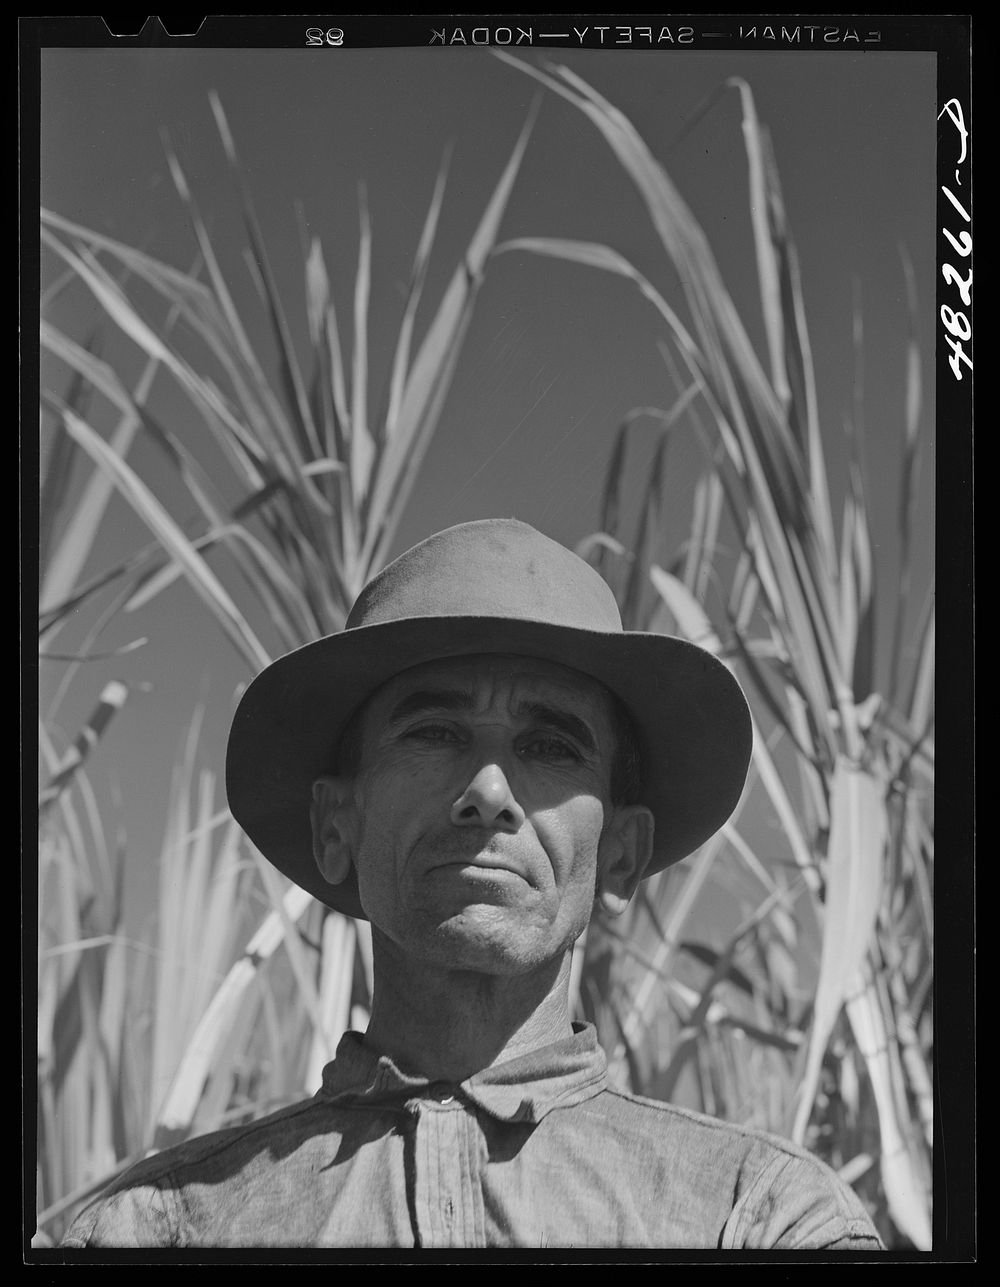 [Untitled photo, possibly related to: Rio Piedras (vicinity), Puerto Rico. FSA (Farm Security Administration) borrower who…